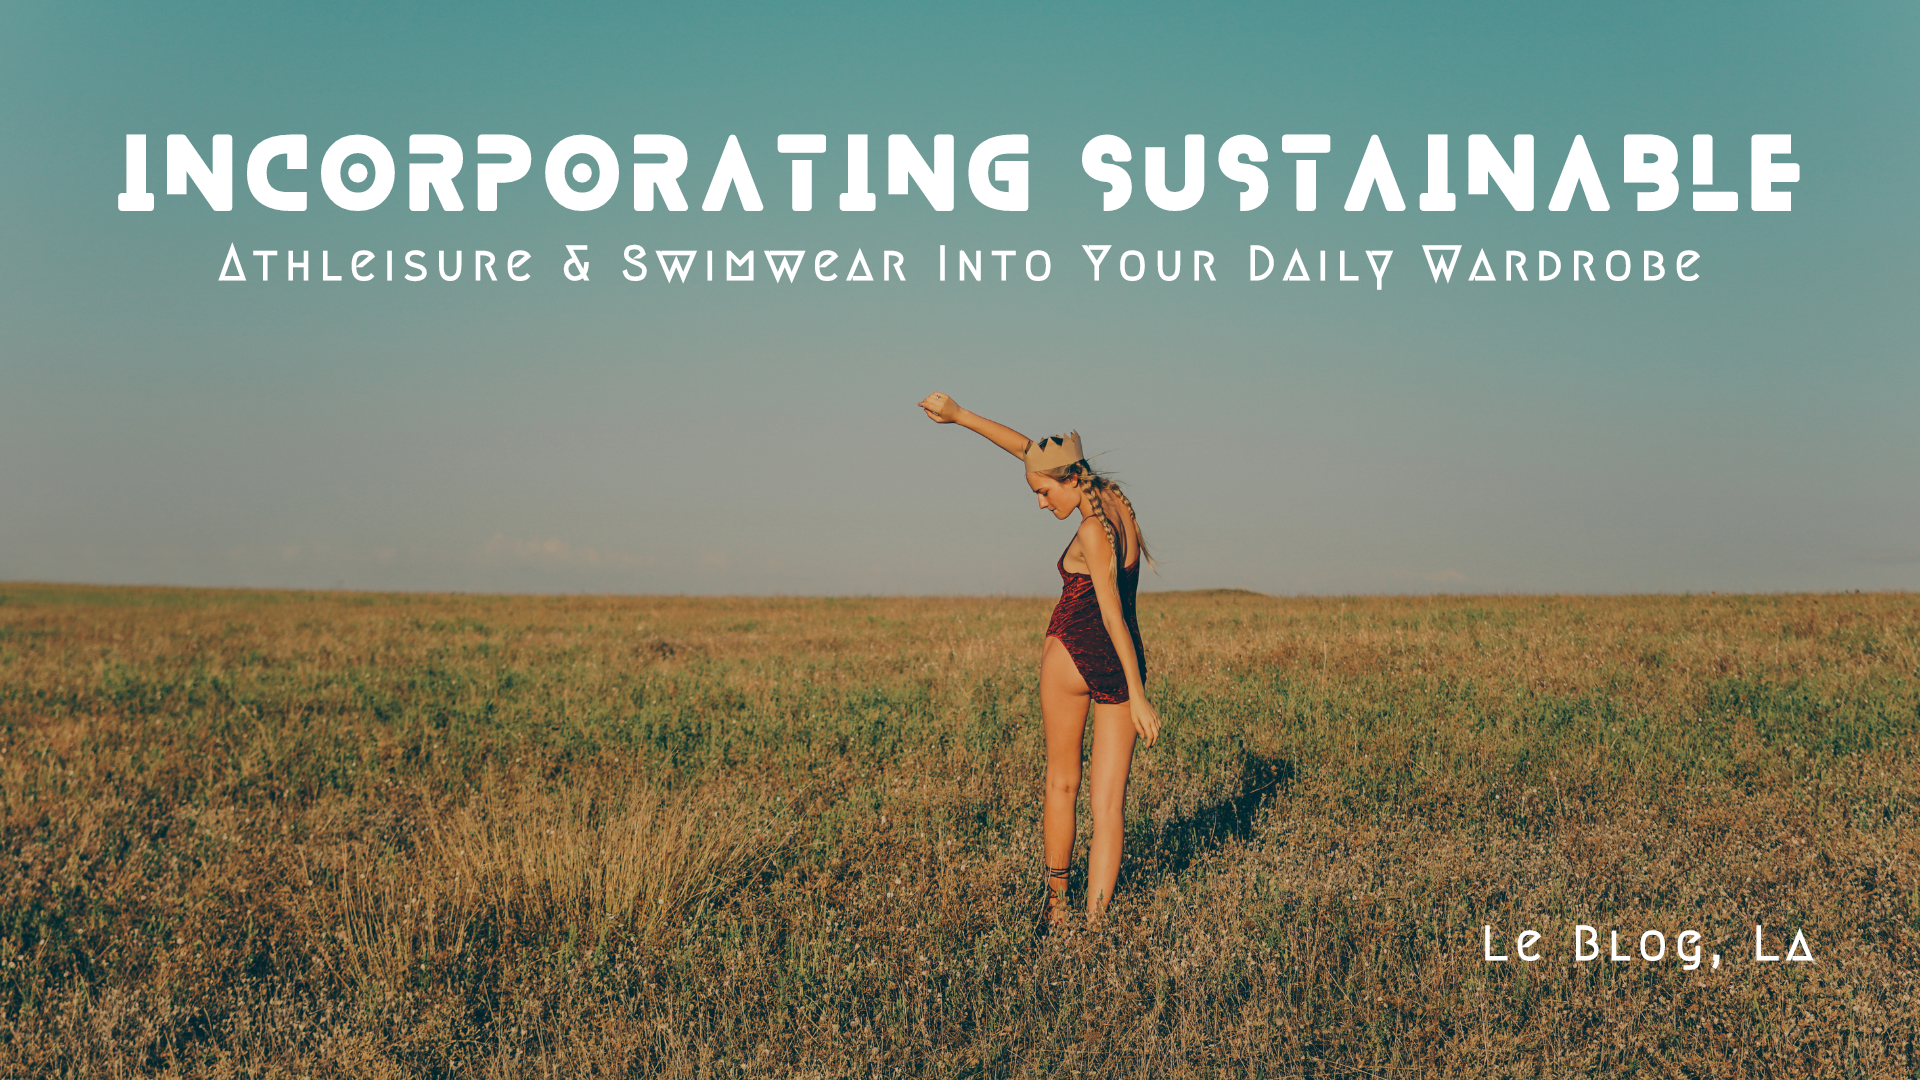 7 Quick Tips On Incorporating Sustainable Athleisure & Swimwear Into Your Daily Wardrobe